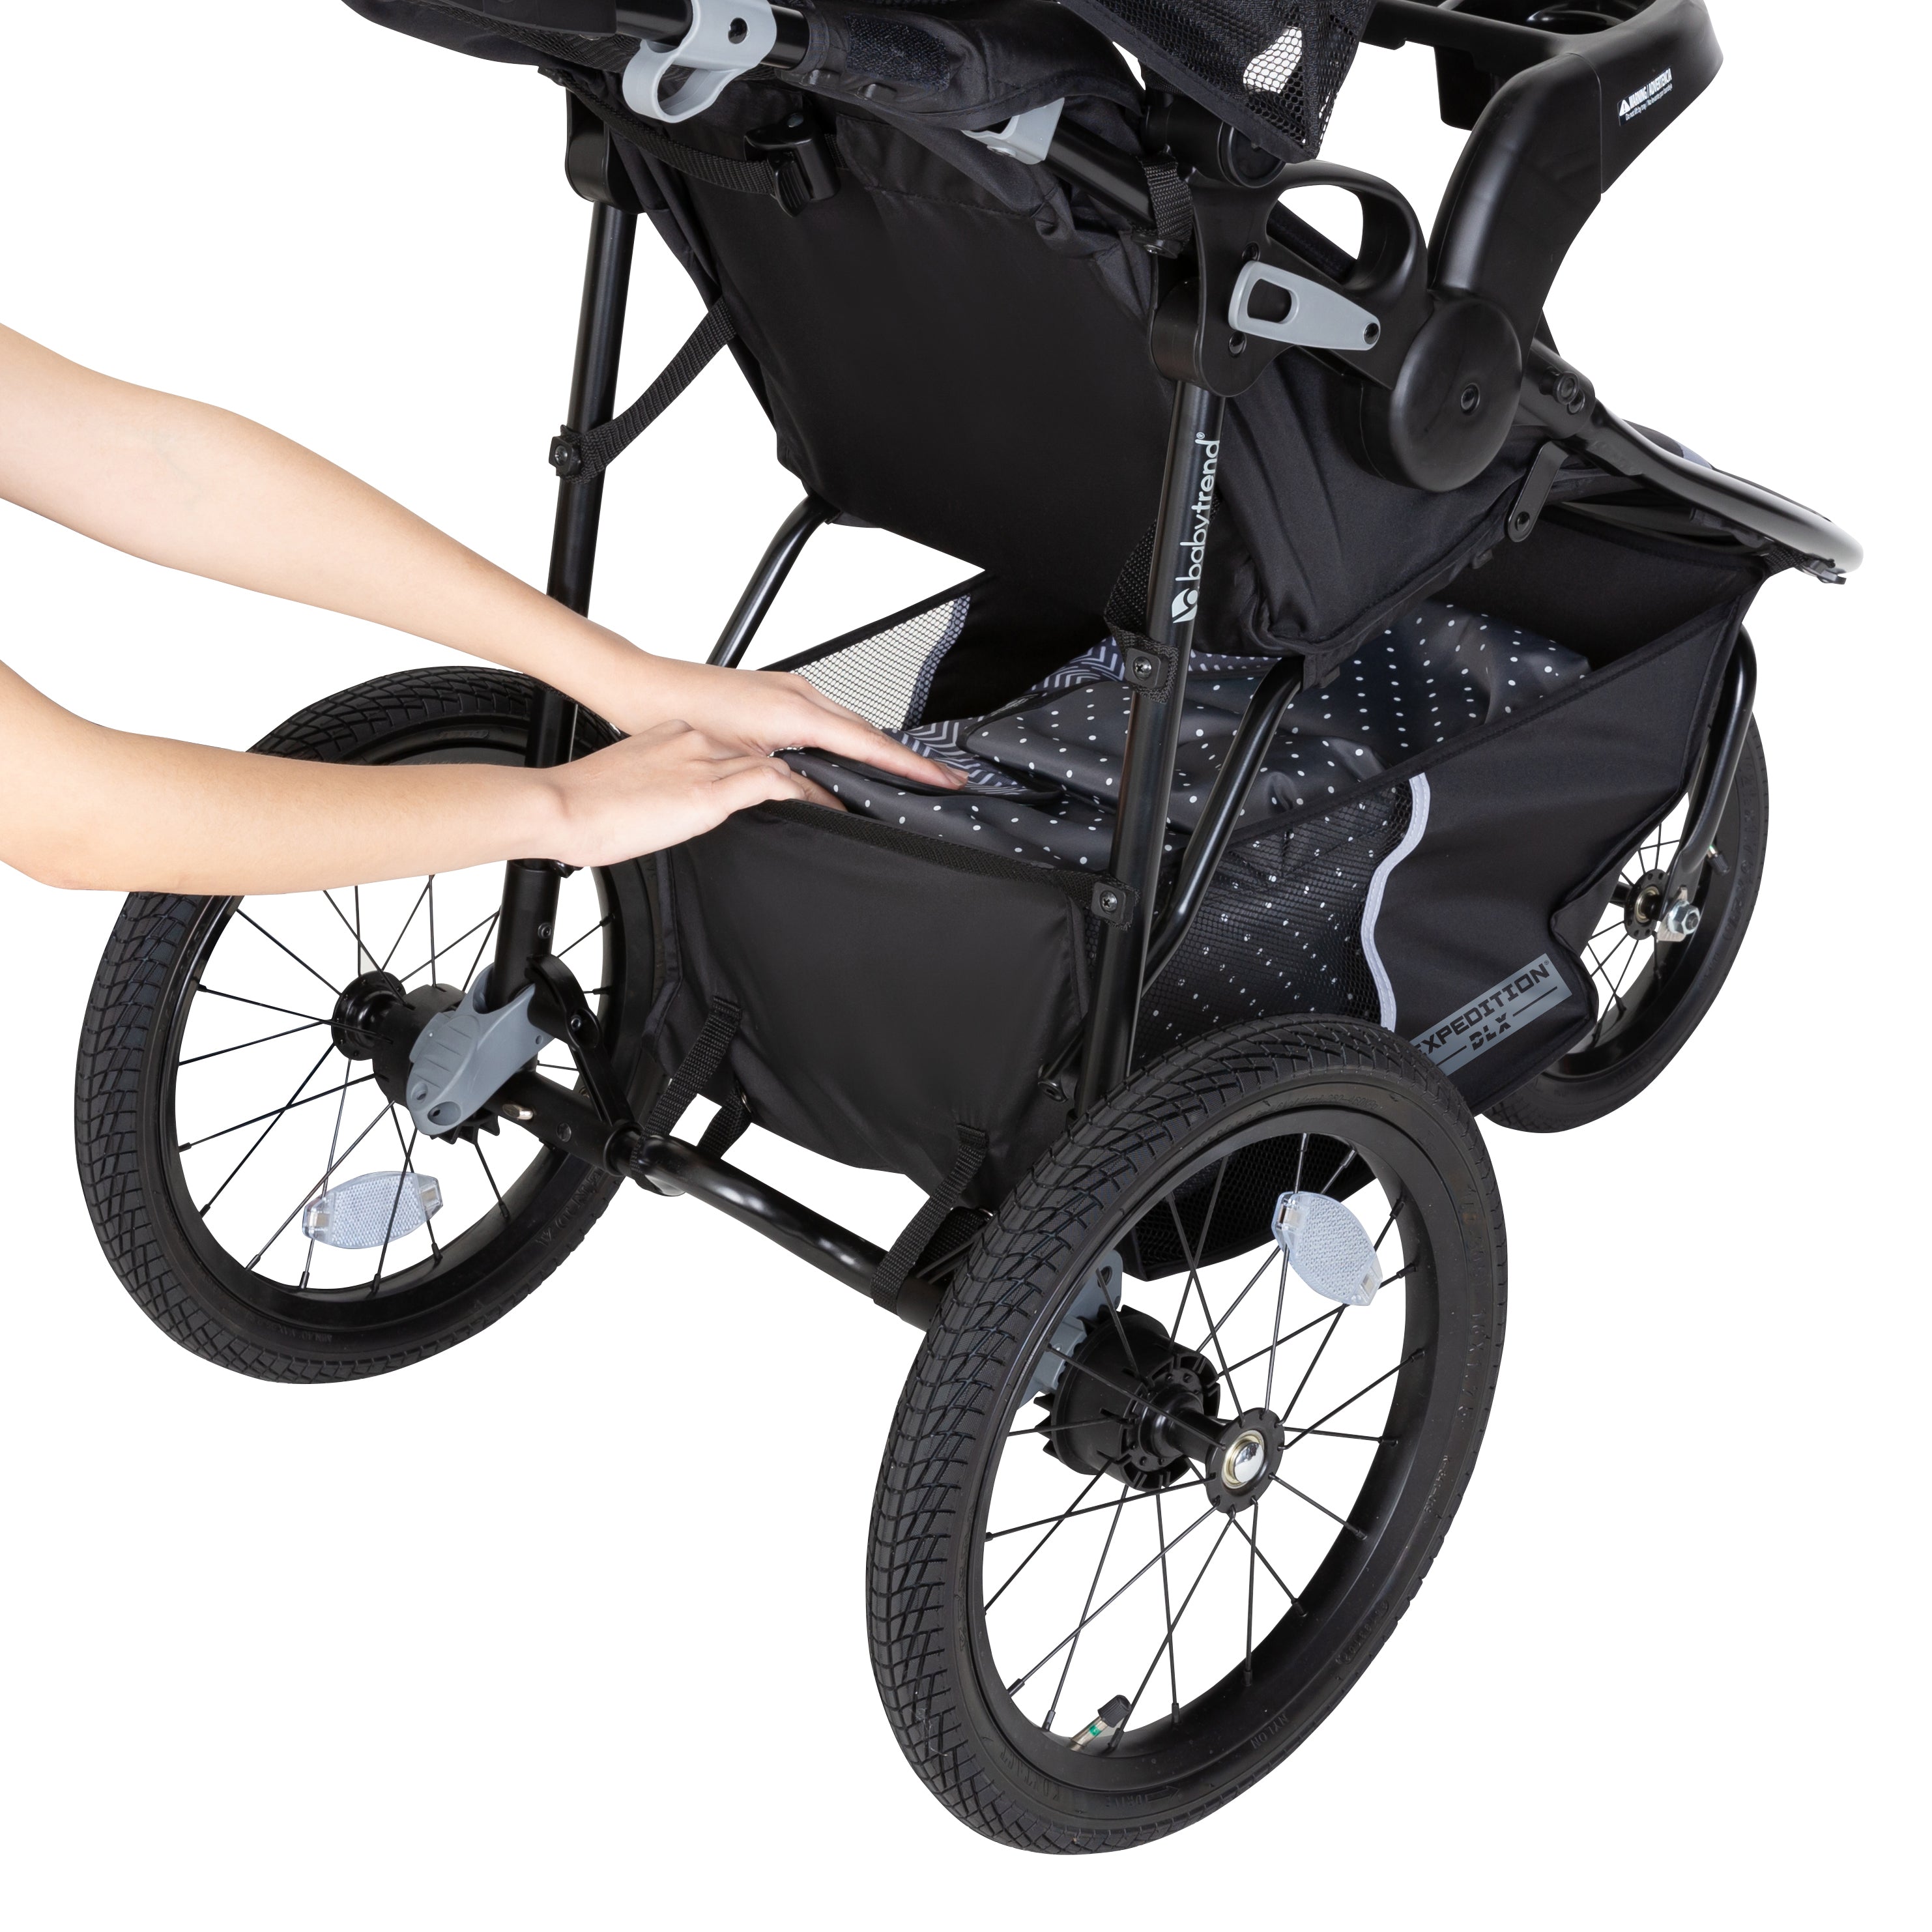 expedition dlx jogger travel system